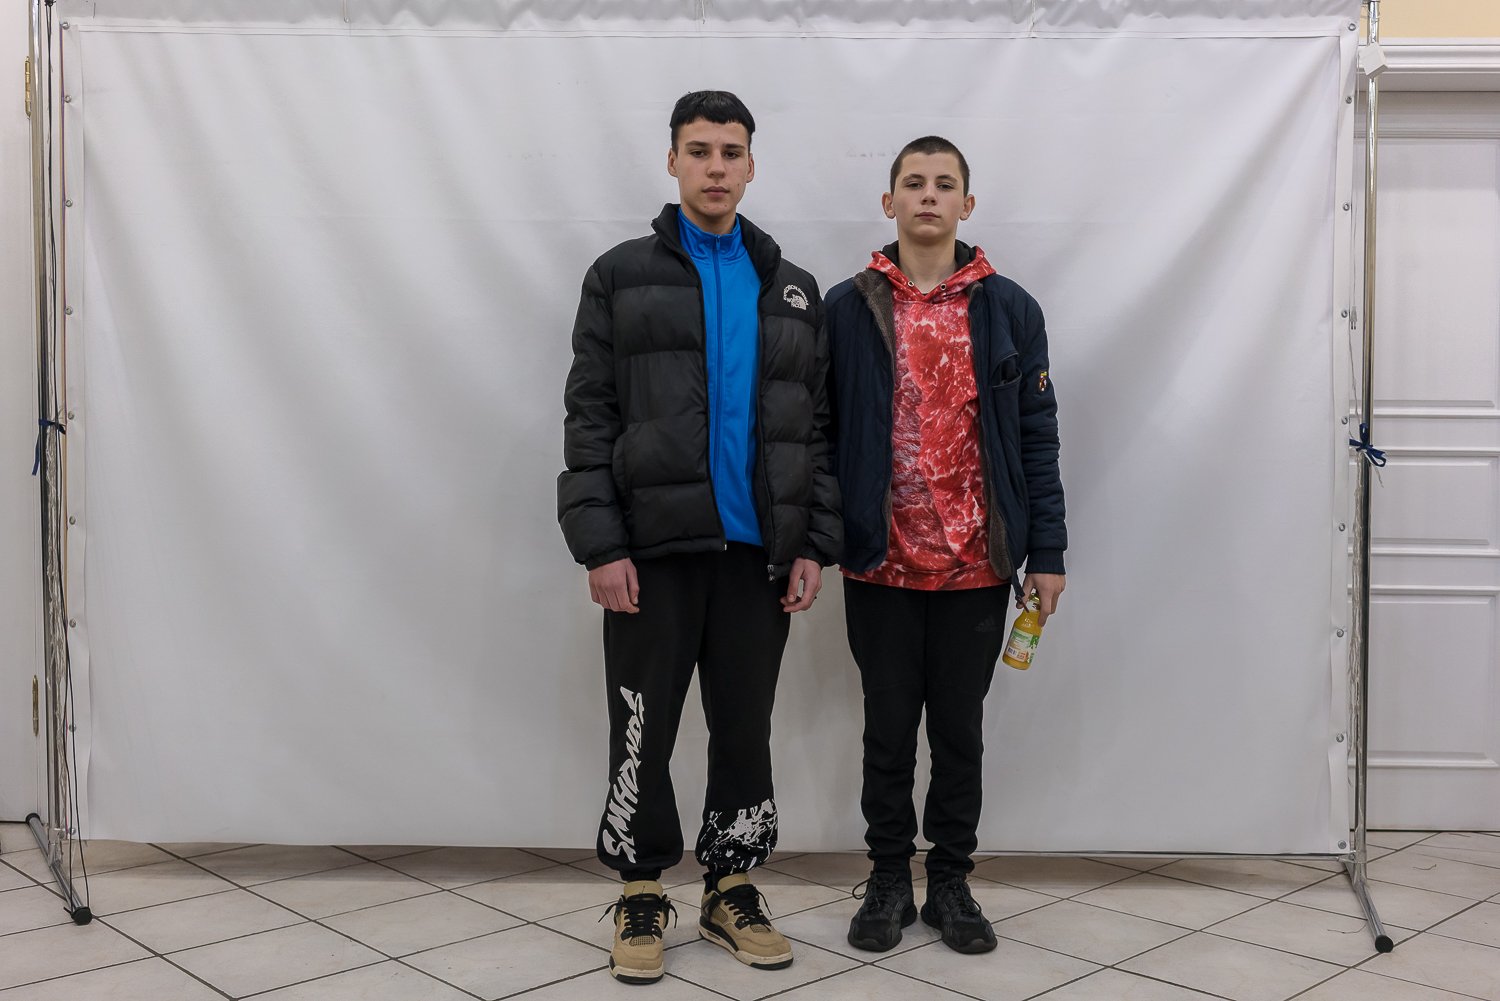  Artyom Zhuravlov, 15, left, and Serhiy Khimchak, 15, pose for a portrait at a welcome reception after traveling by bus from Riga, Latvia to Kyiv with 15 other children who were forcibly taken to Russia or Russian-controlled territories, on Thursday,